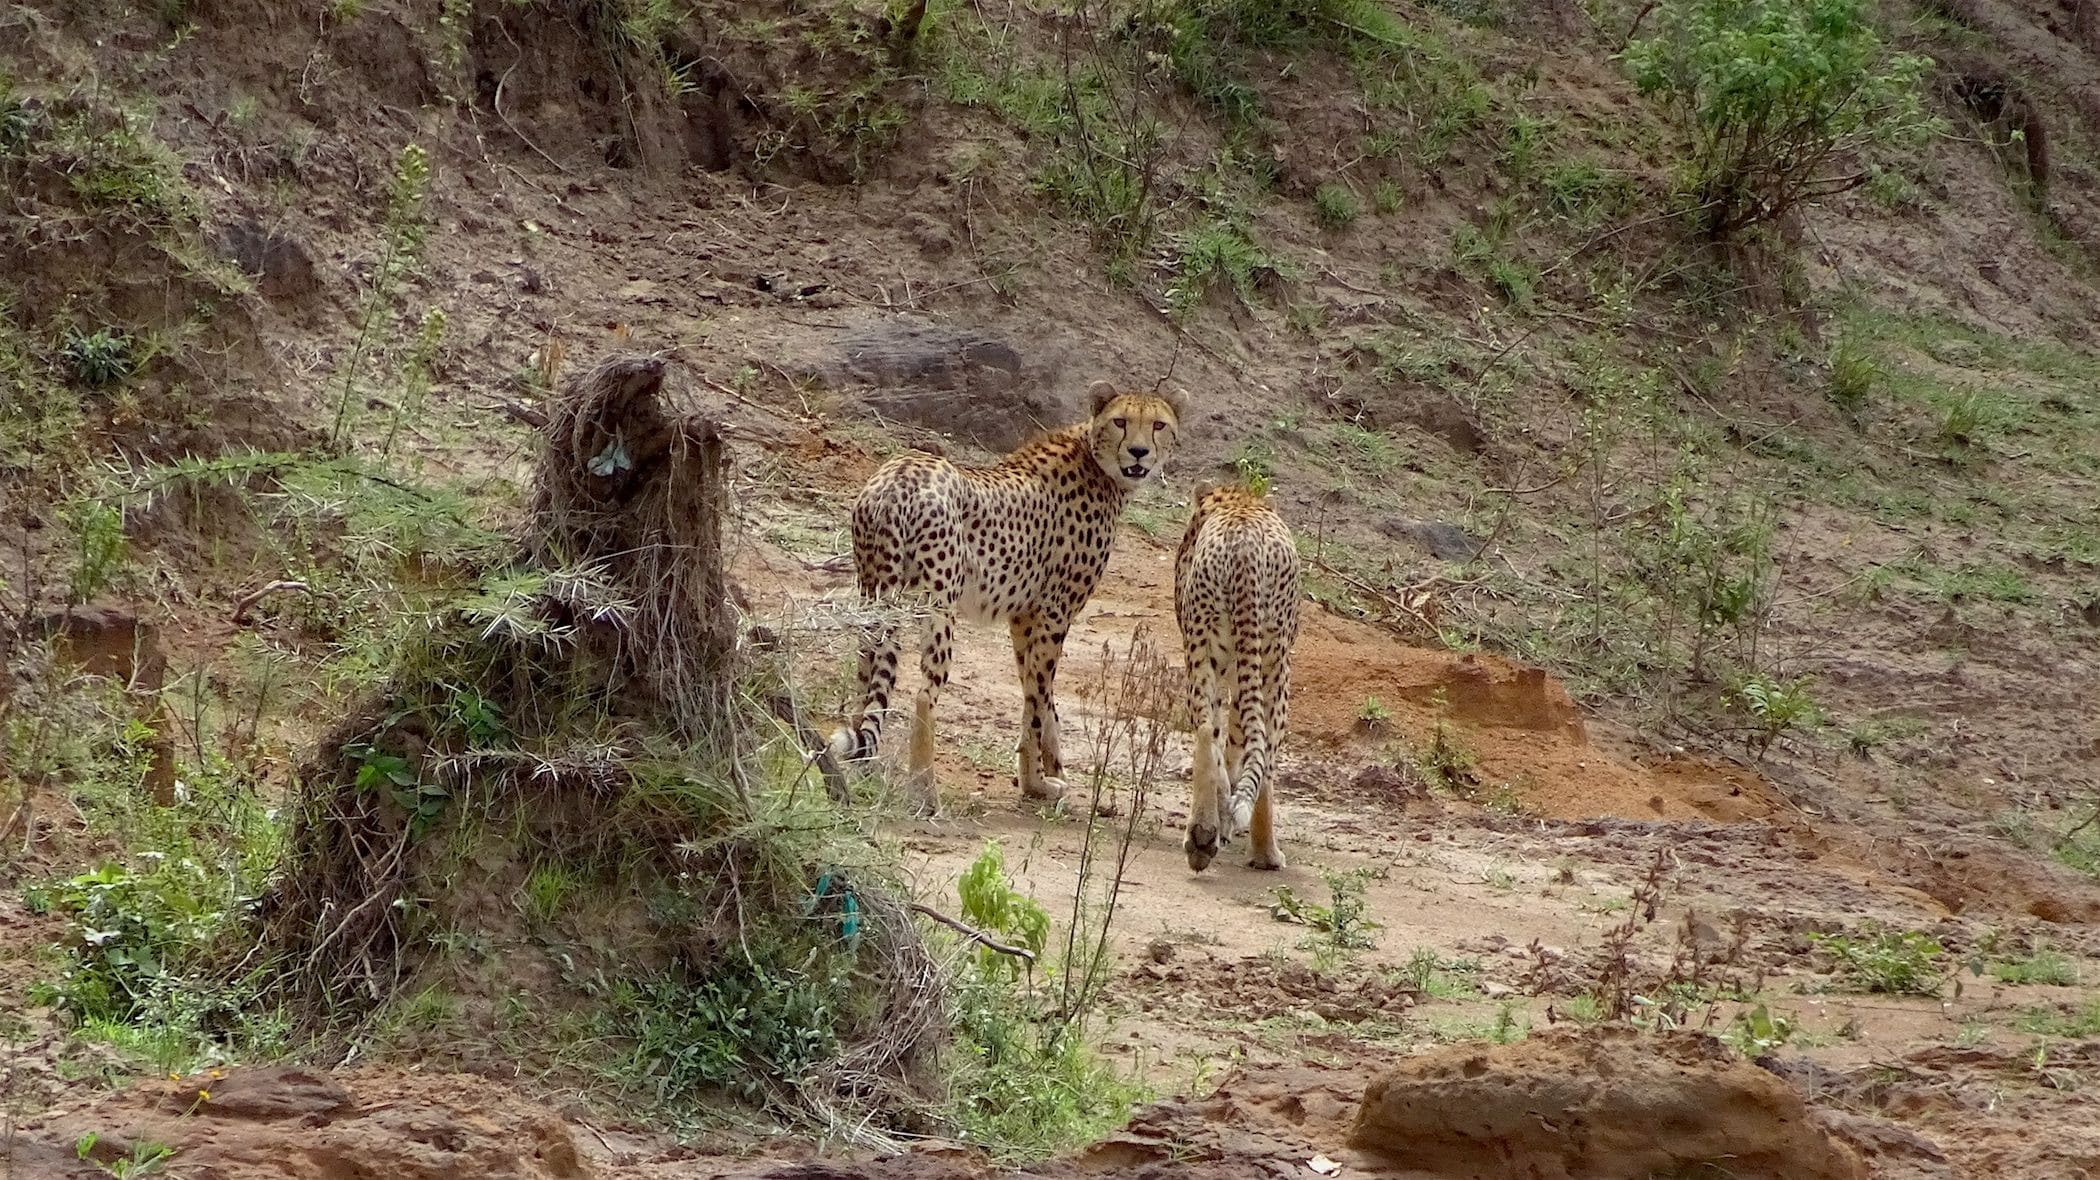 Cheetahs spend a lot of their day traveling their ranges looking for food.